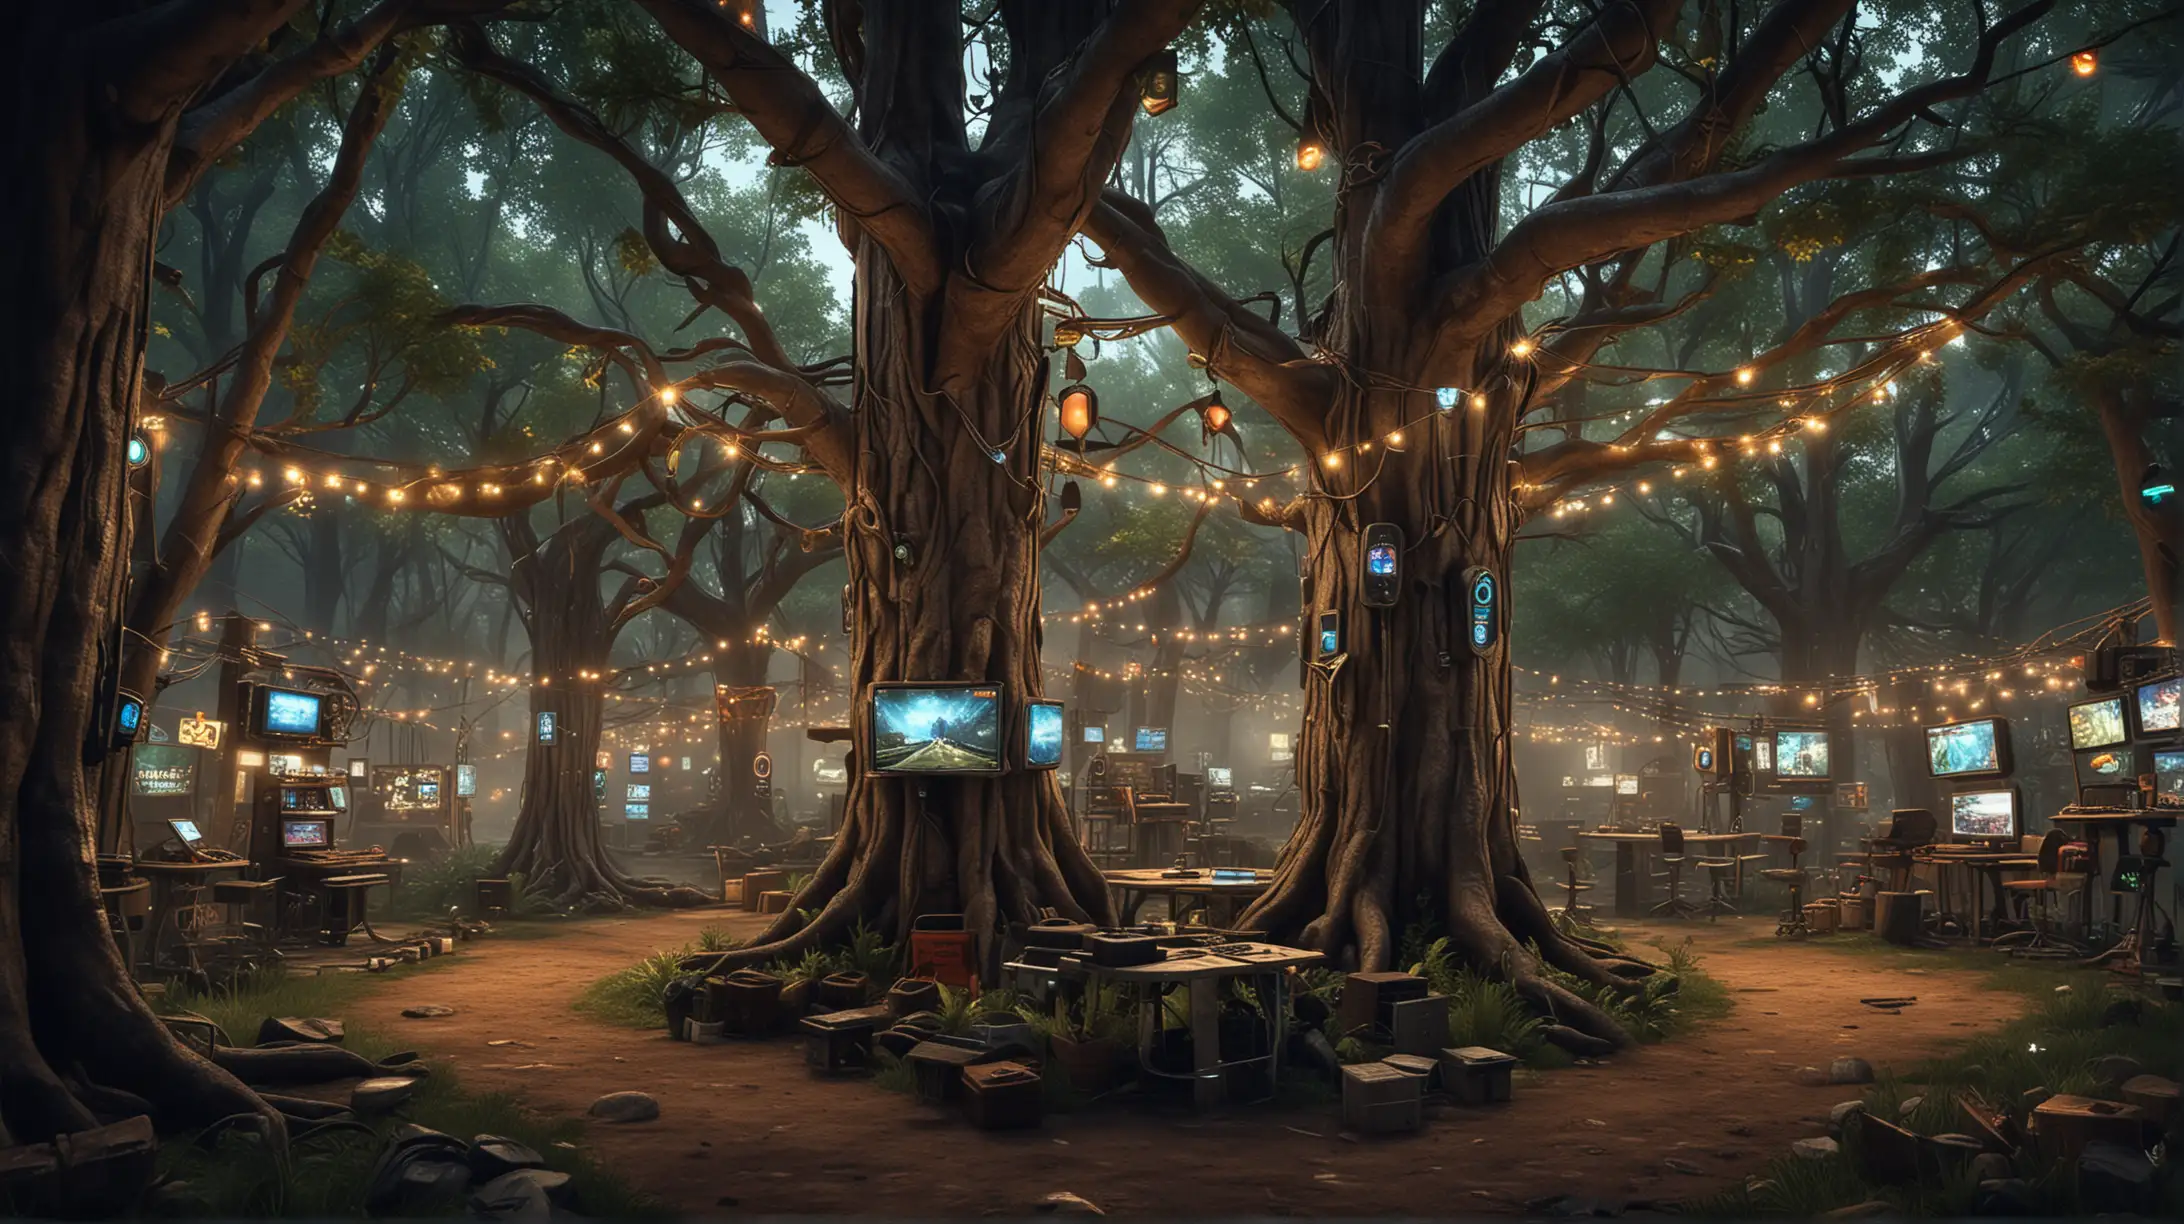 Cyber Gaming Haven TechThemed Gathering in a Treed Grove